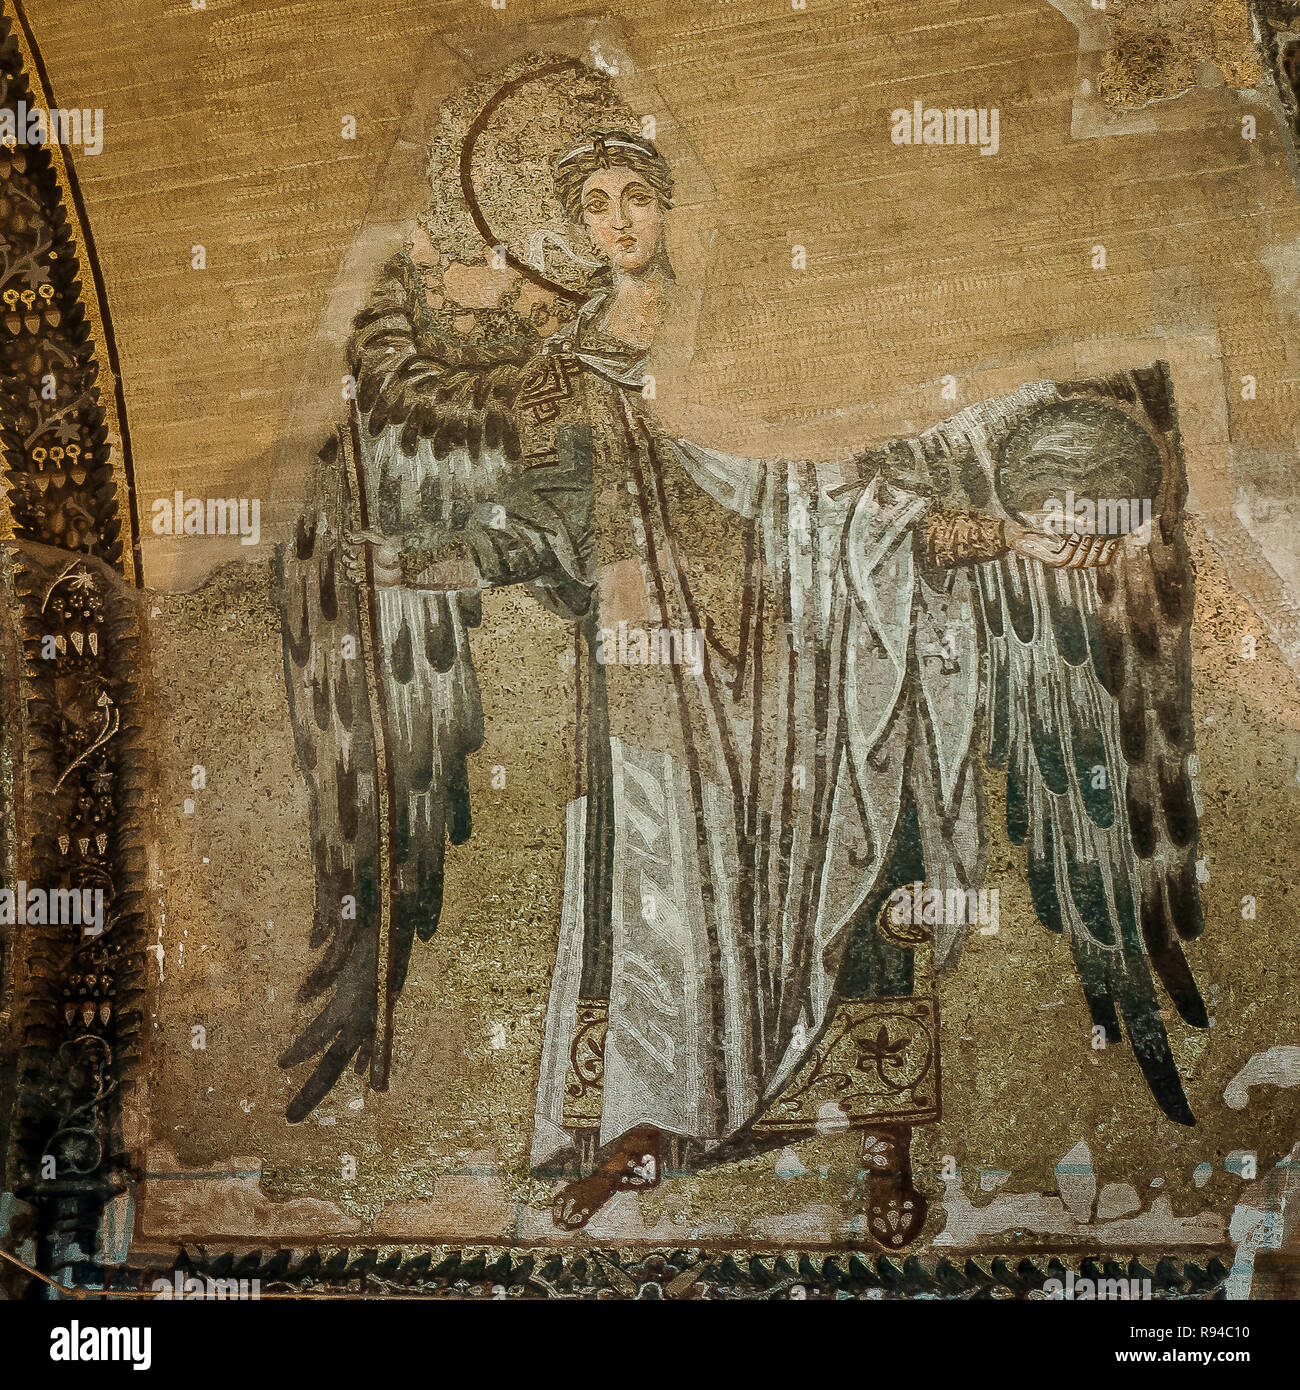 Archangel Gabriel in the apse of Hagia Sofia dressed in feathers, holding an orb, Istanbul, Turkey, October 8, 2013 Stock Photo